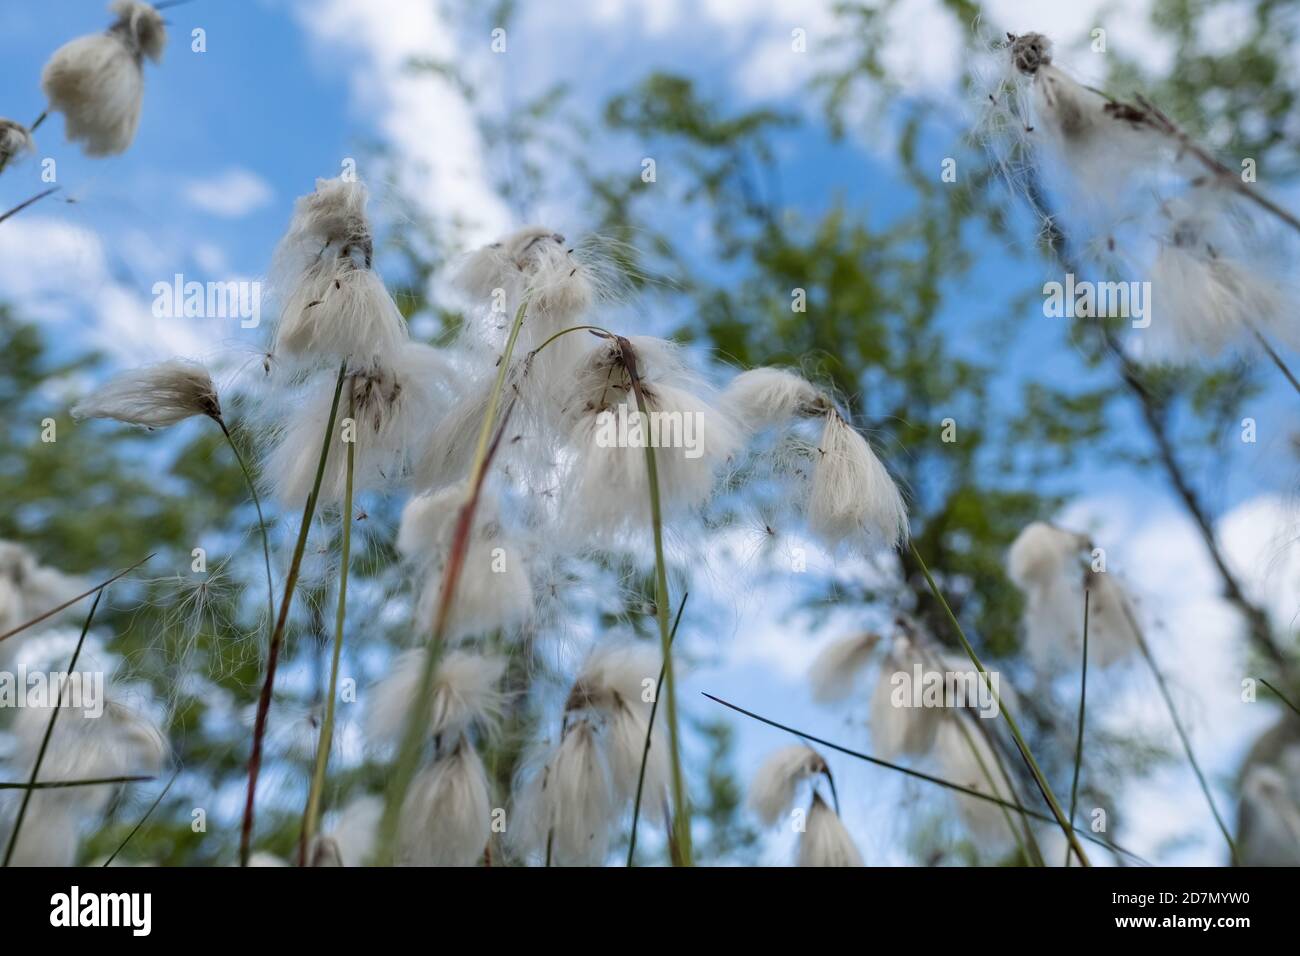 Beautiful, fluffy plant Eriophorum vaginata against a background of blue sky and blurry trees in the forest. Bottom view. Stock Photo